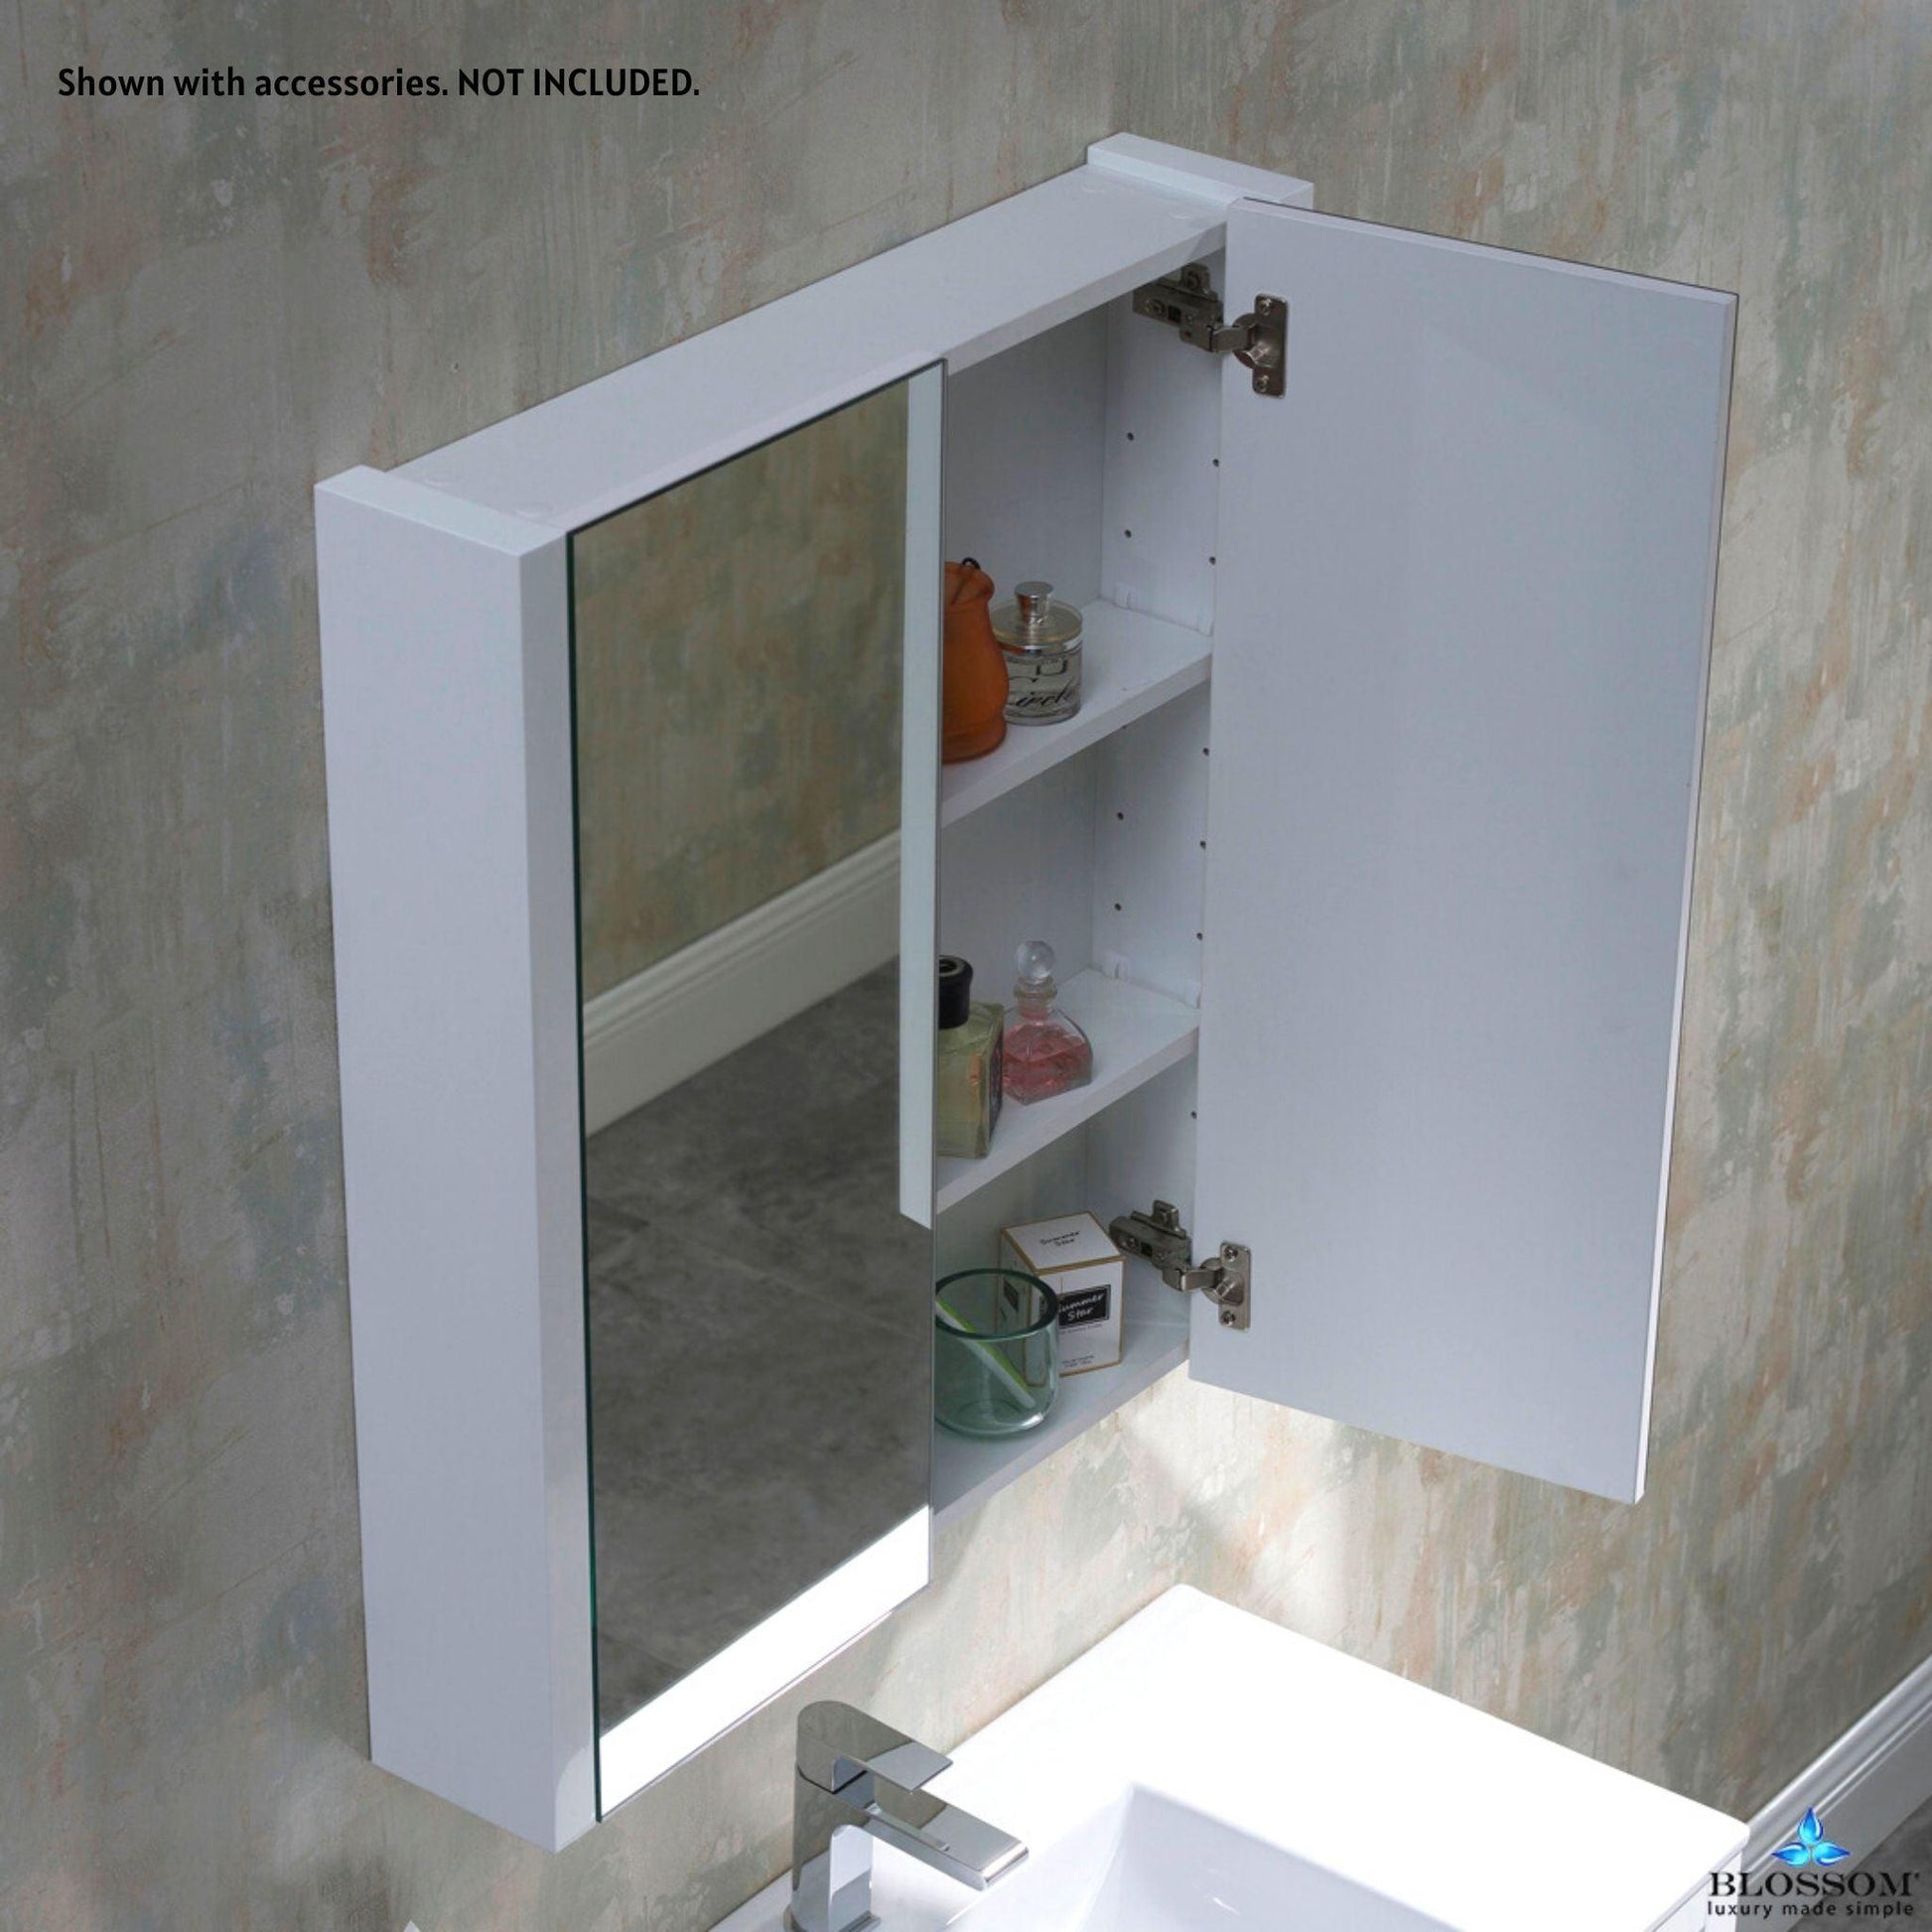 Blossom Milan 30" x 32" Glossy White Recessed or Surface Mount 2-Door Mirror Medicine Cabinet With Adjustable Wood Shelves and Soft-Closing Hinges